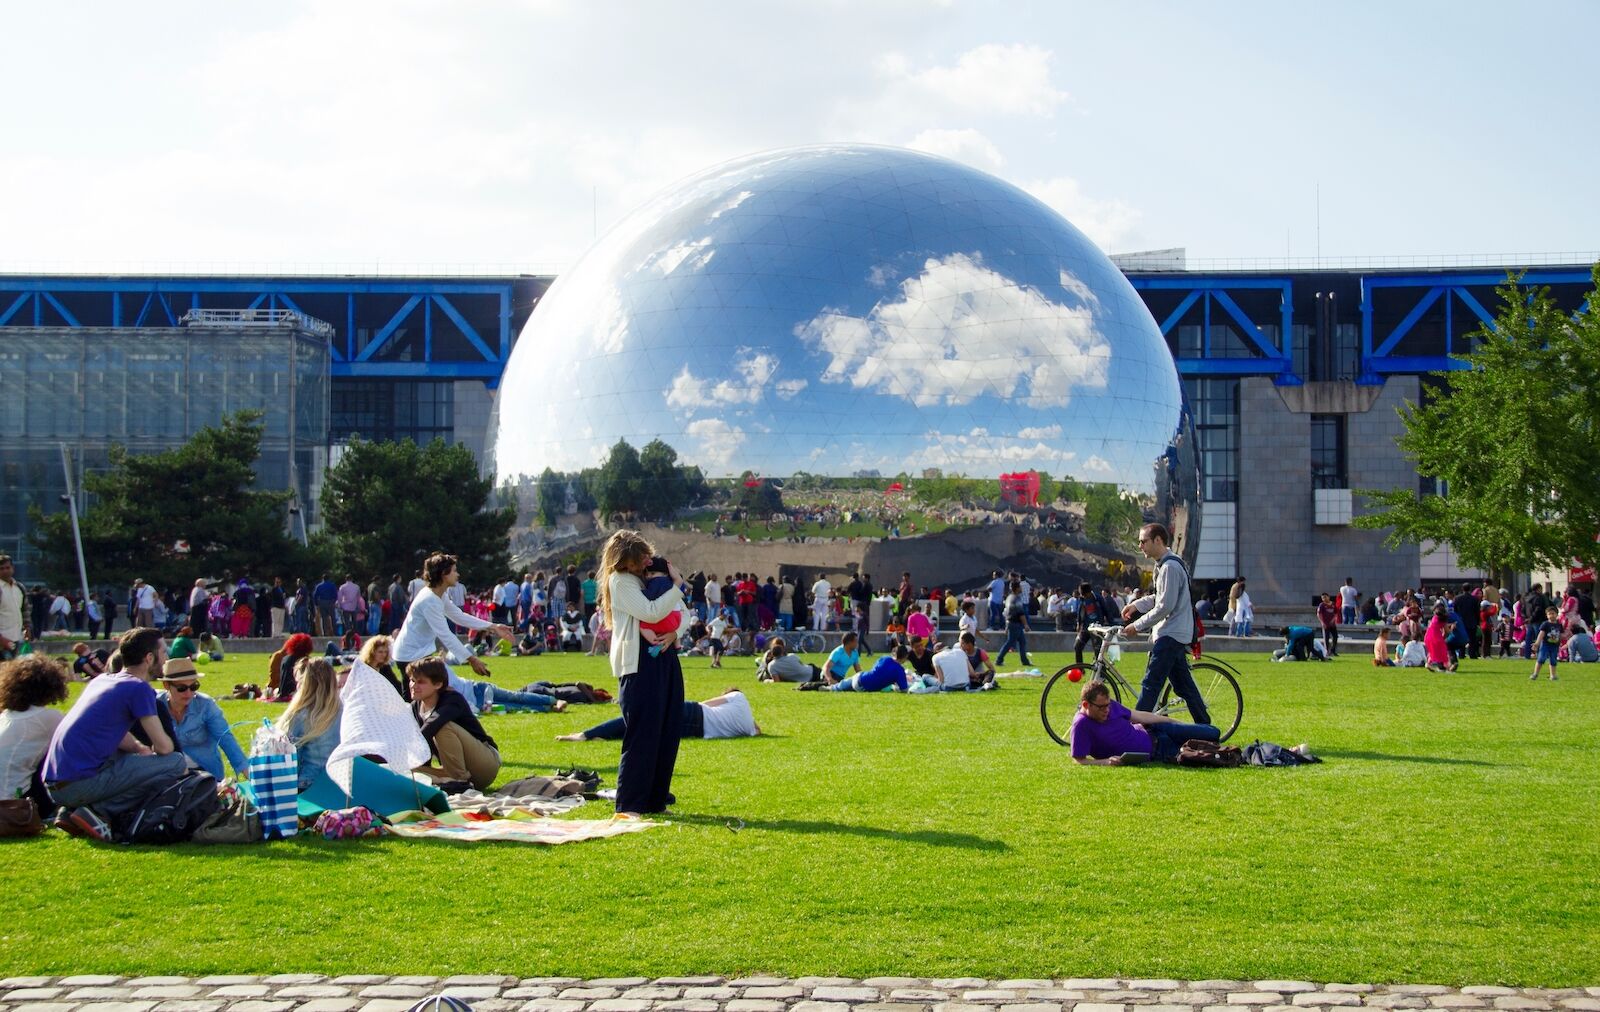 Parc de la Villette in Paris where there are outdoor movie screenings in the summer